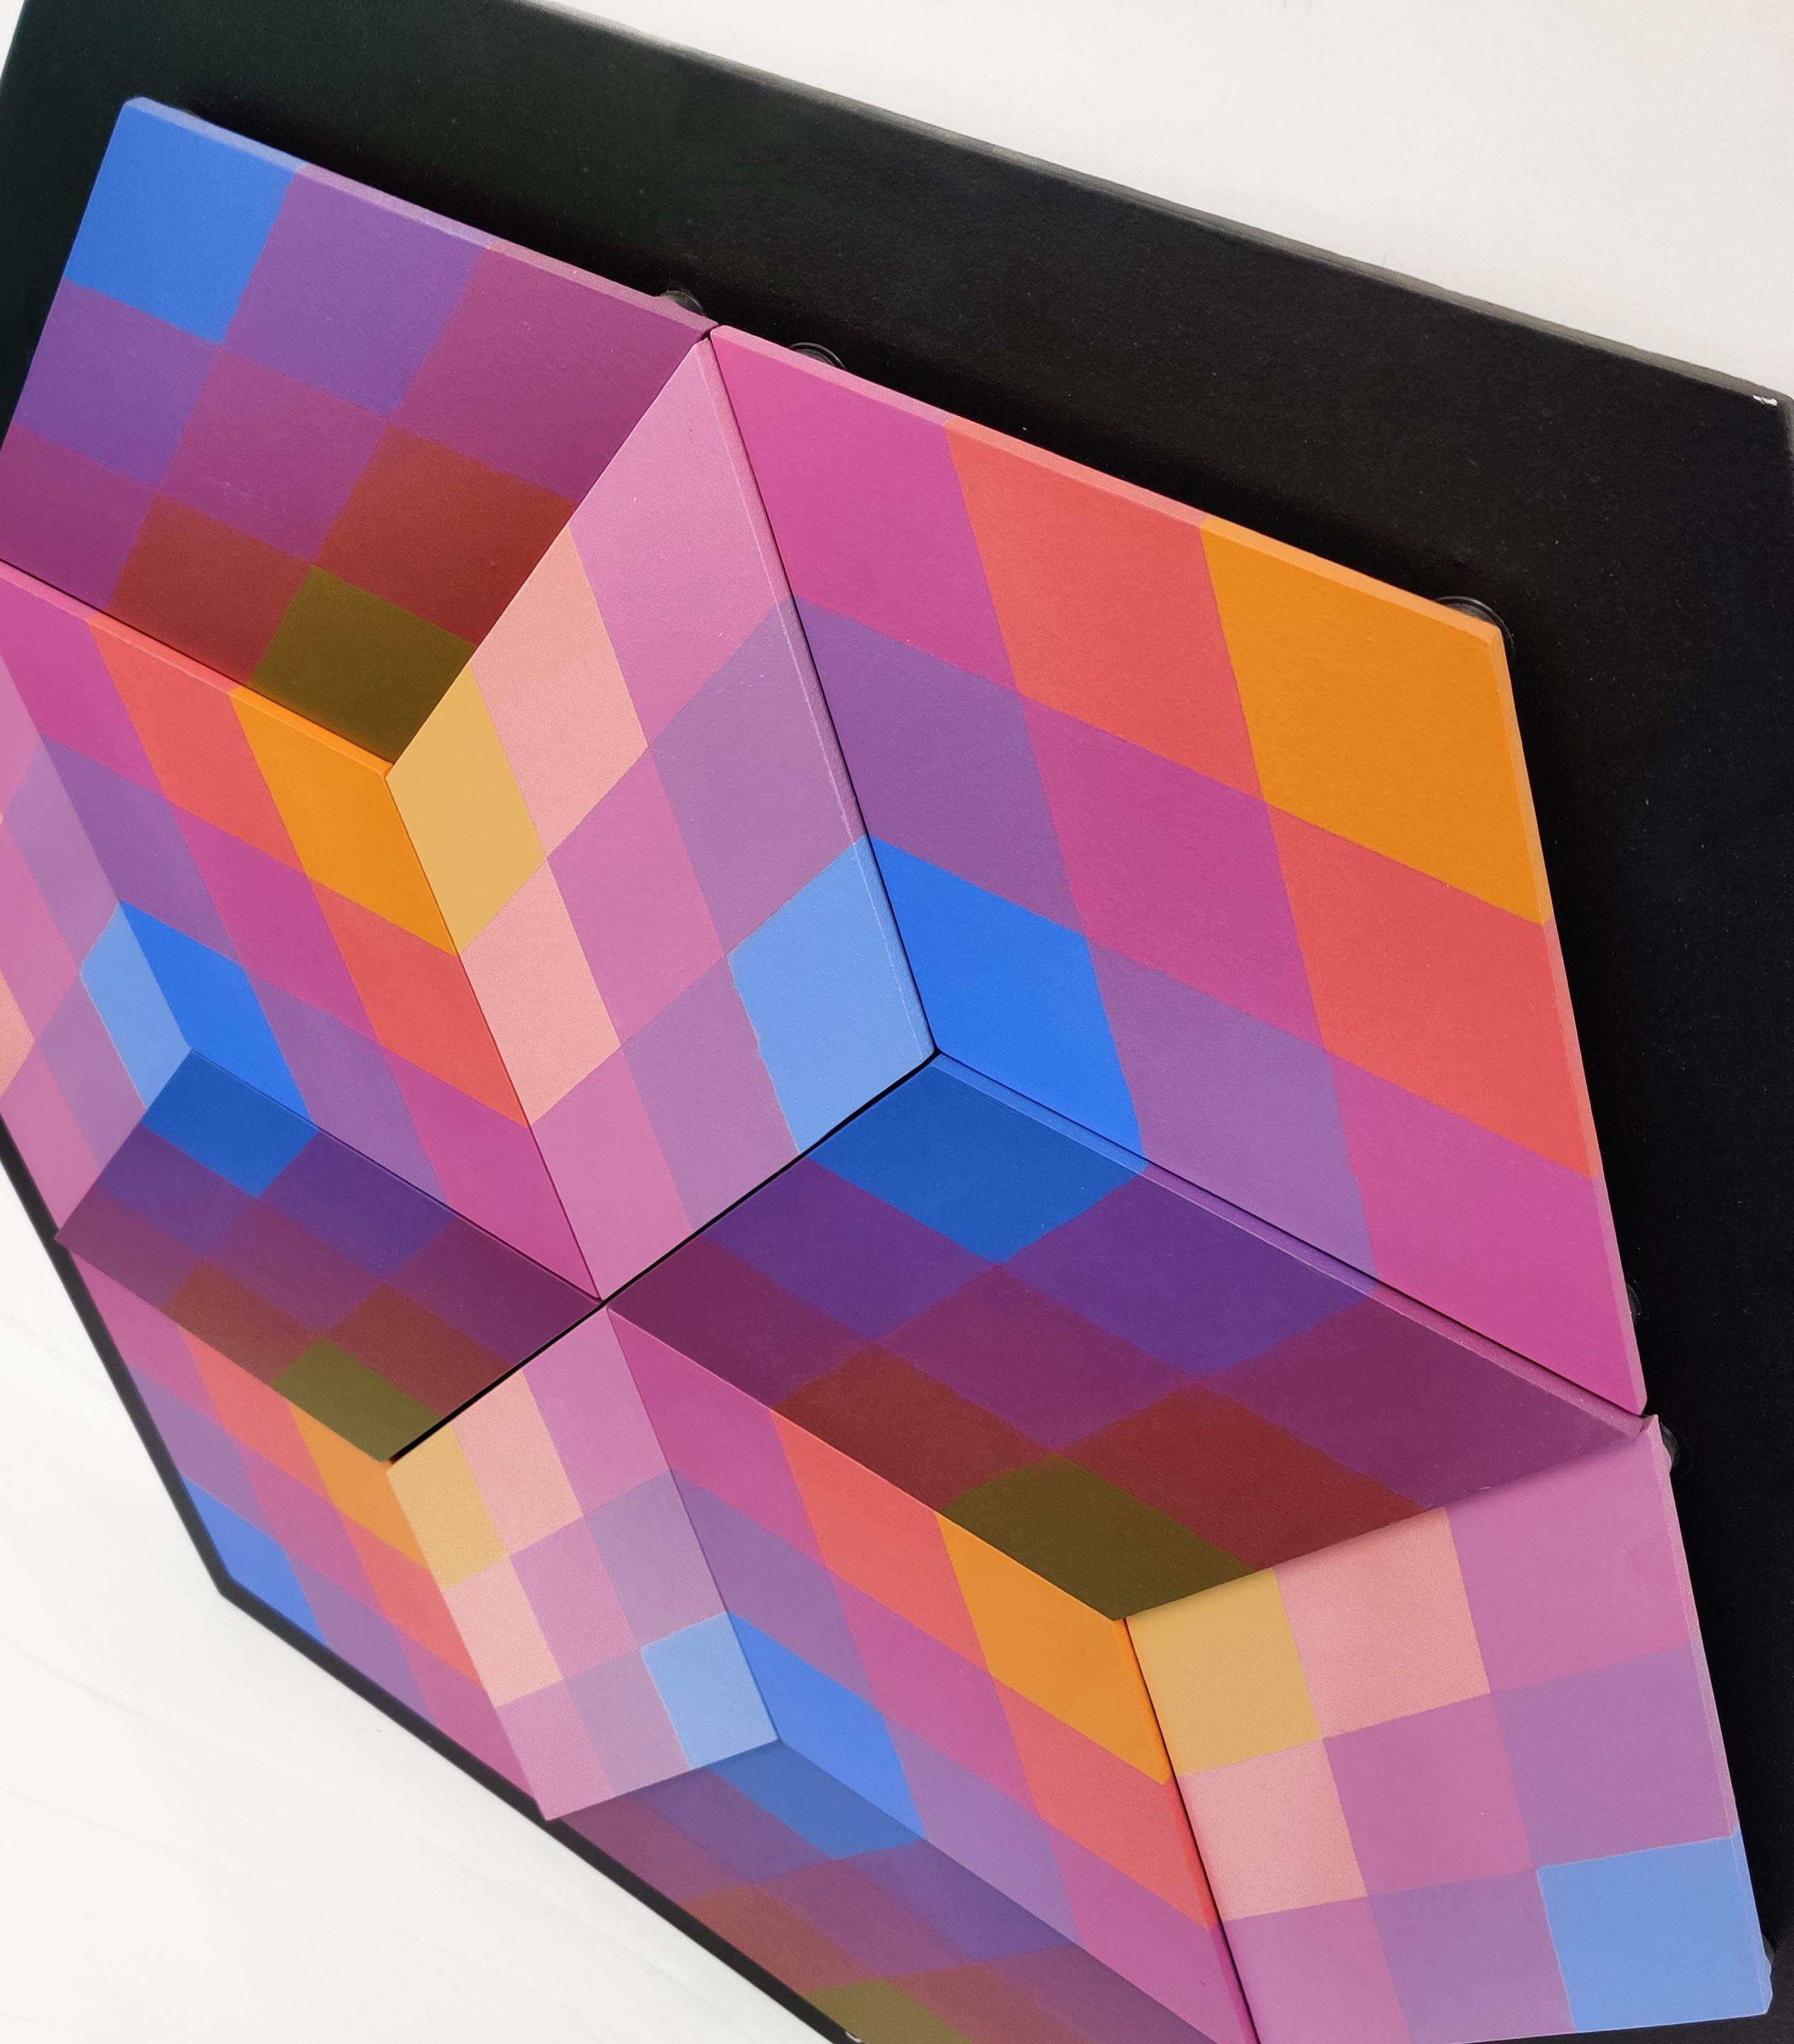 CUBED (DIMENSIONAL PIECES OF WOOD WITHMAGNETS) - Painting by Stan Slutsky